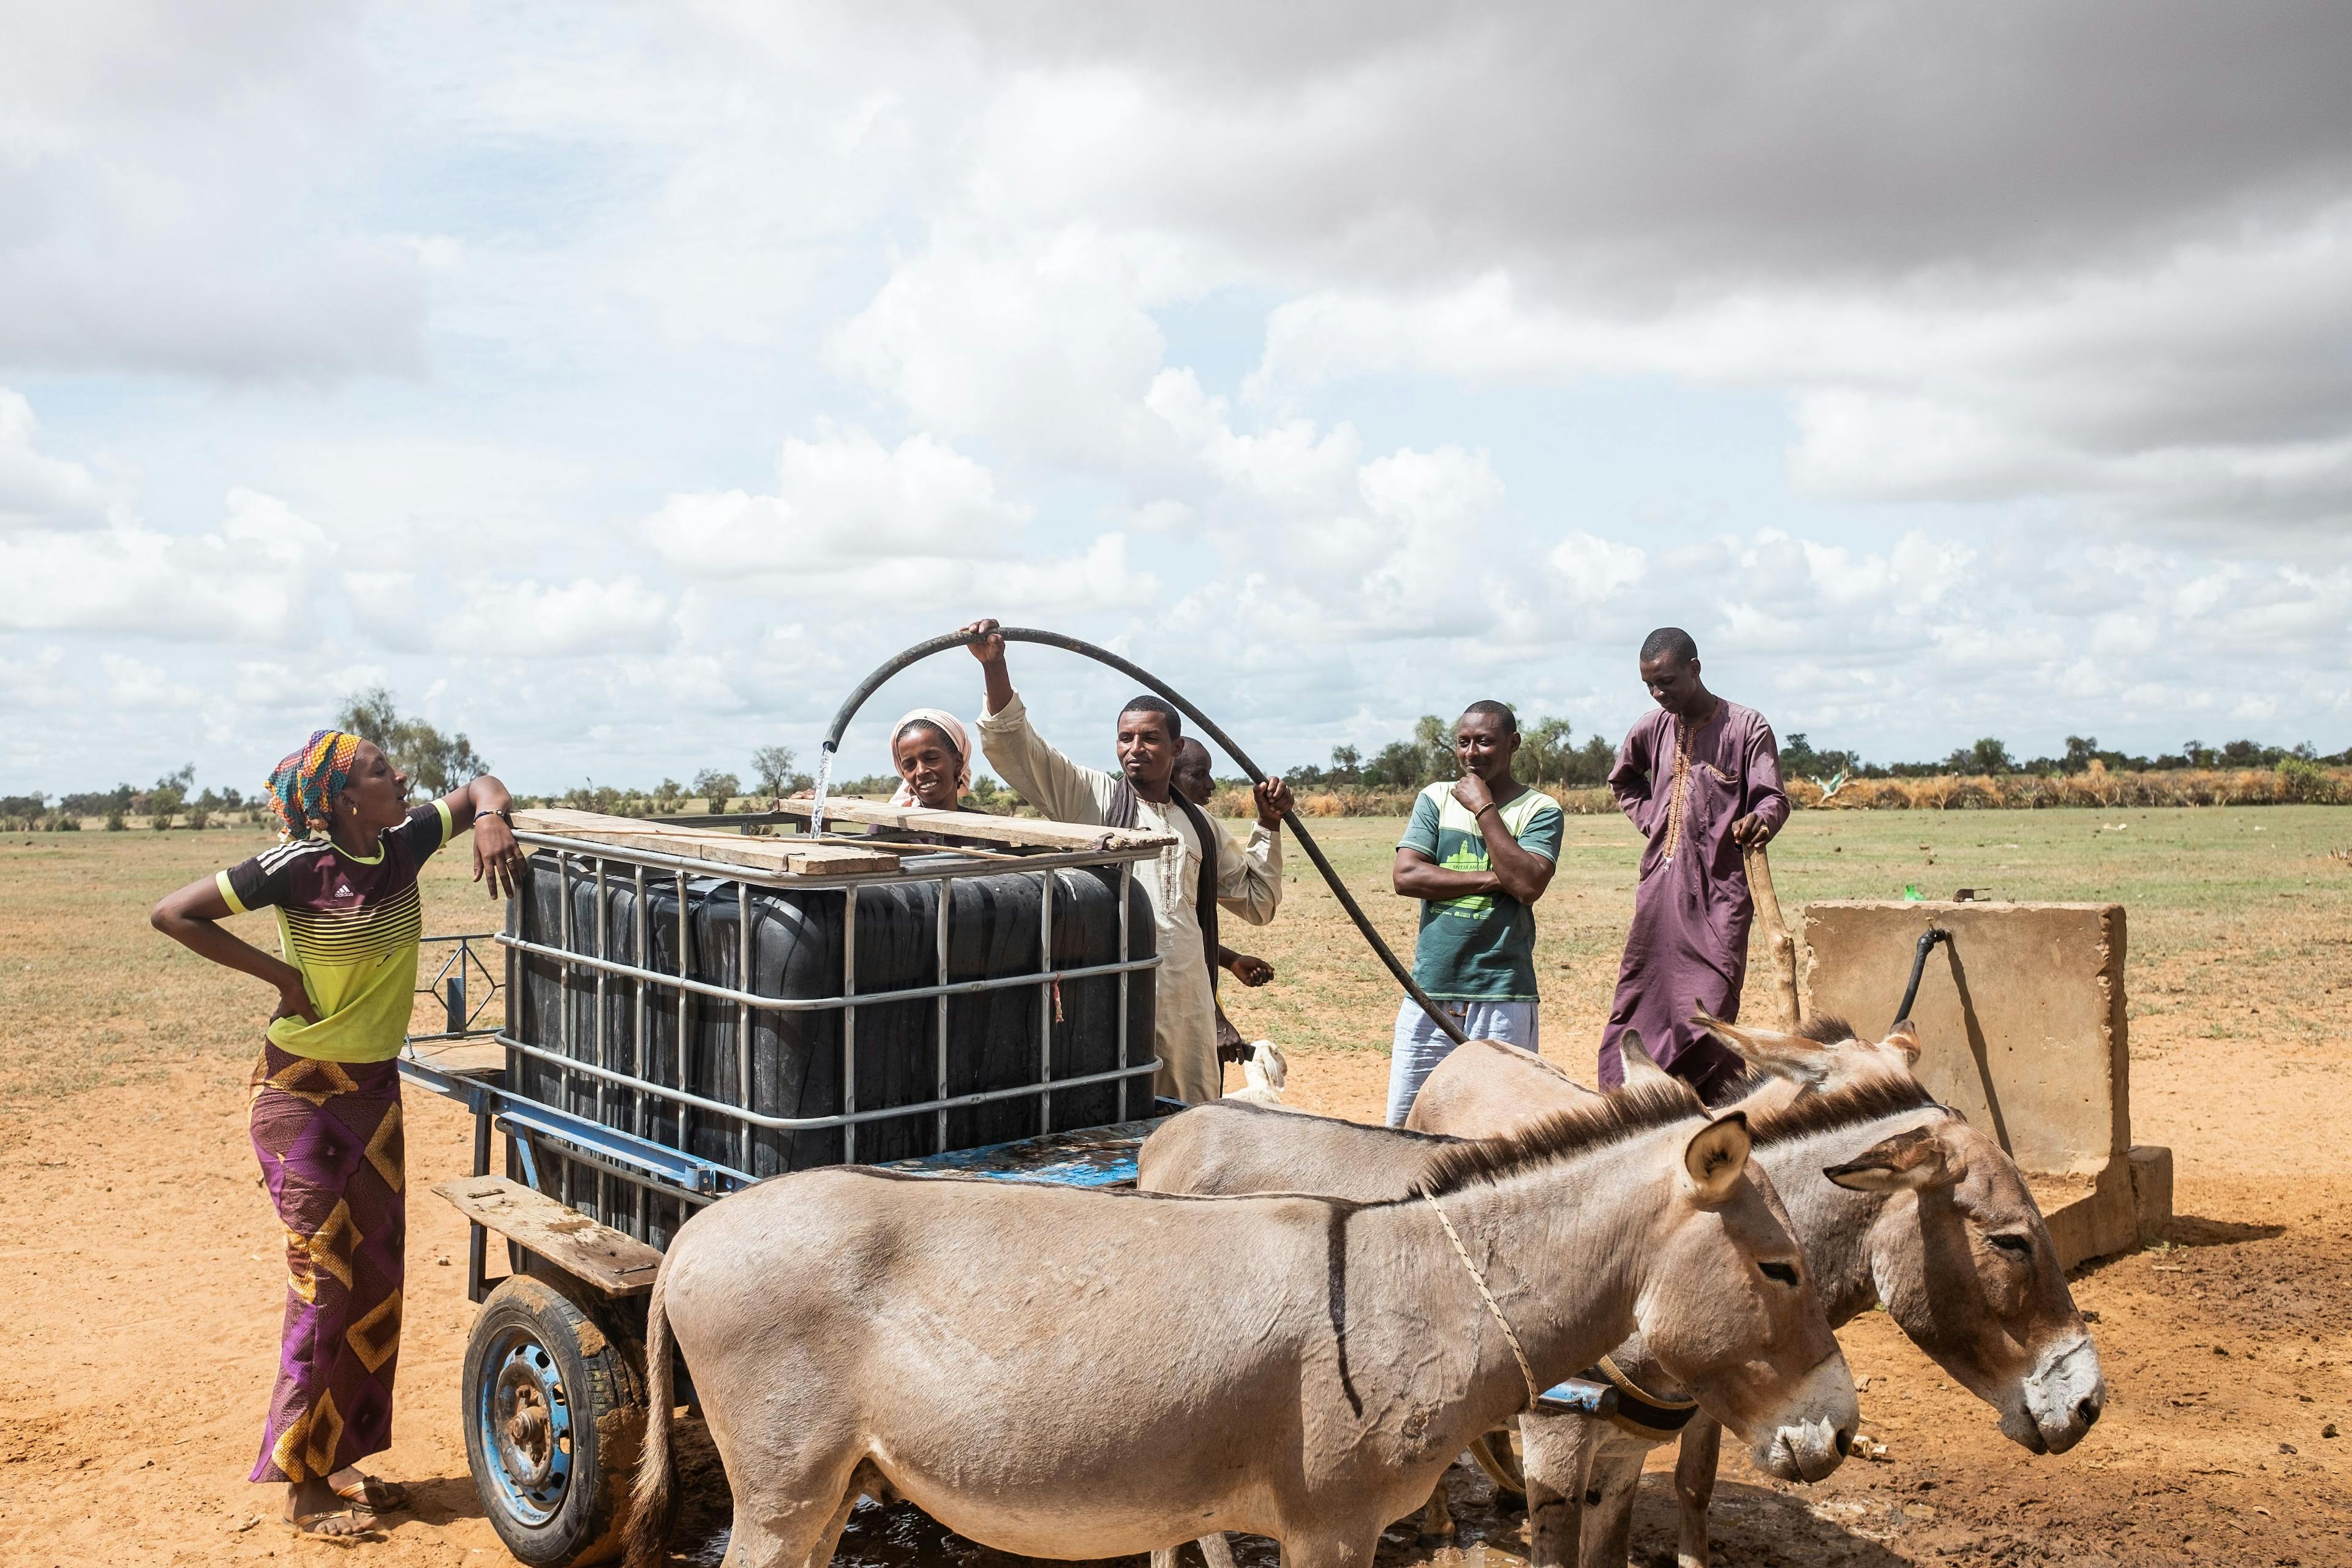 Herders traditionally take their animals to water. Now, many fill containers at wells — like this one, 3 km from the village — and transport it home. As climate stress intensifies, managing shared water and land could test social cohesion. 